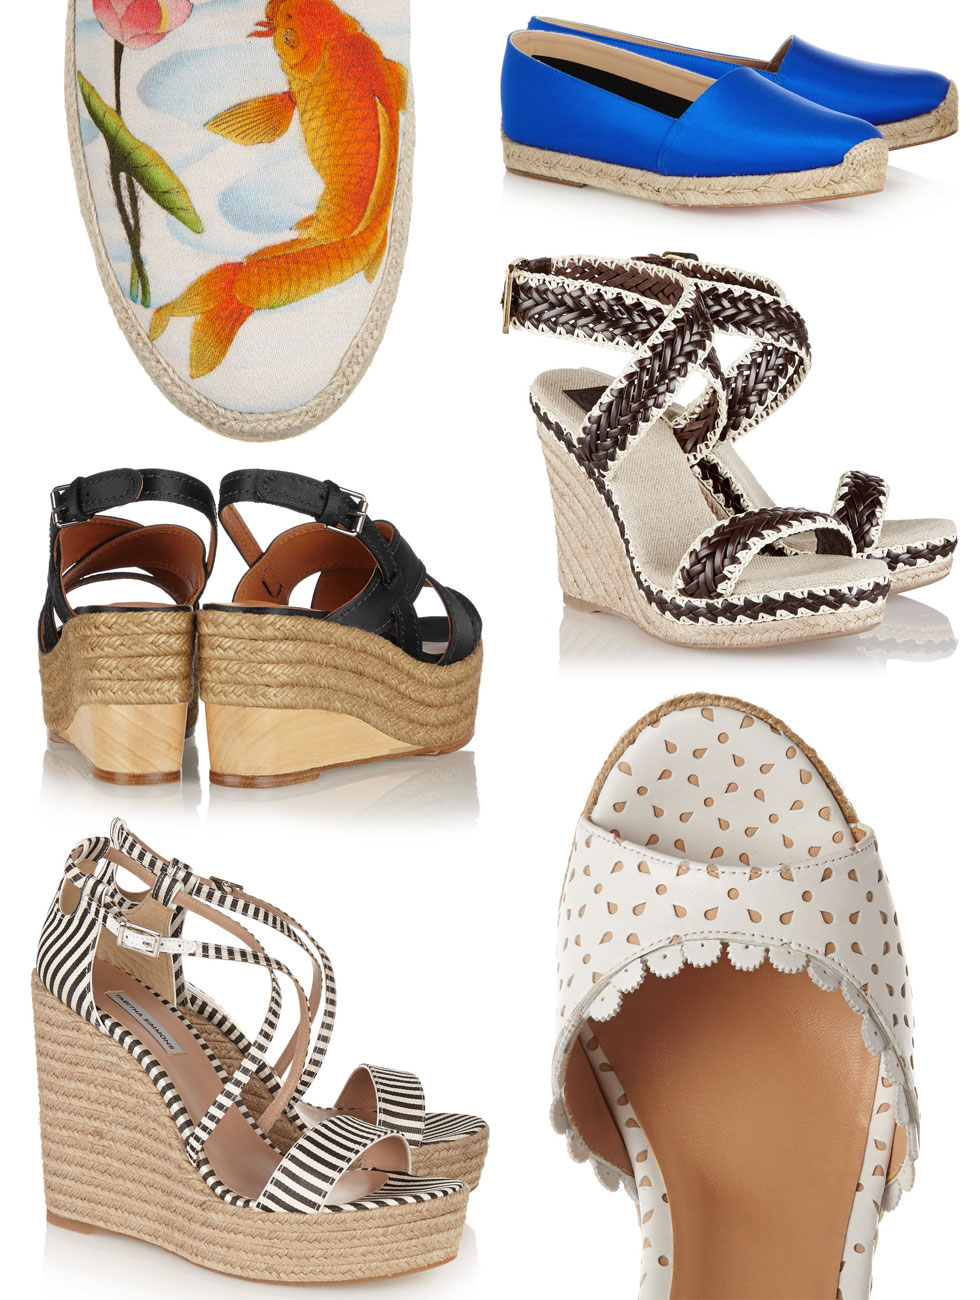 Fashion Trend - The Espadrille Trend